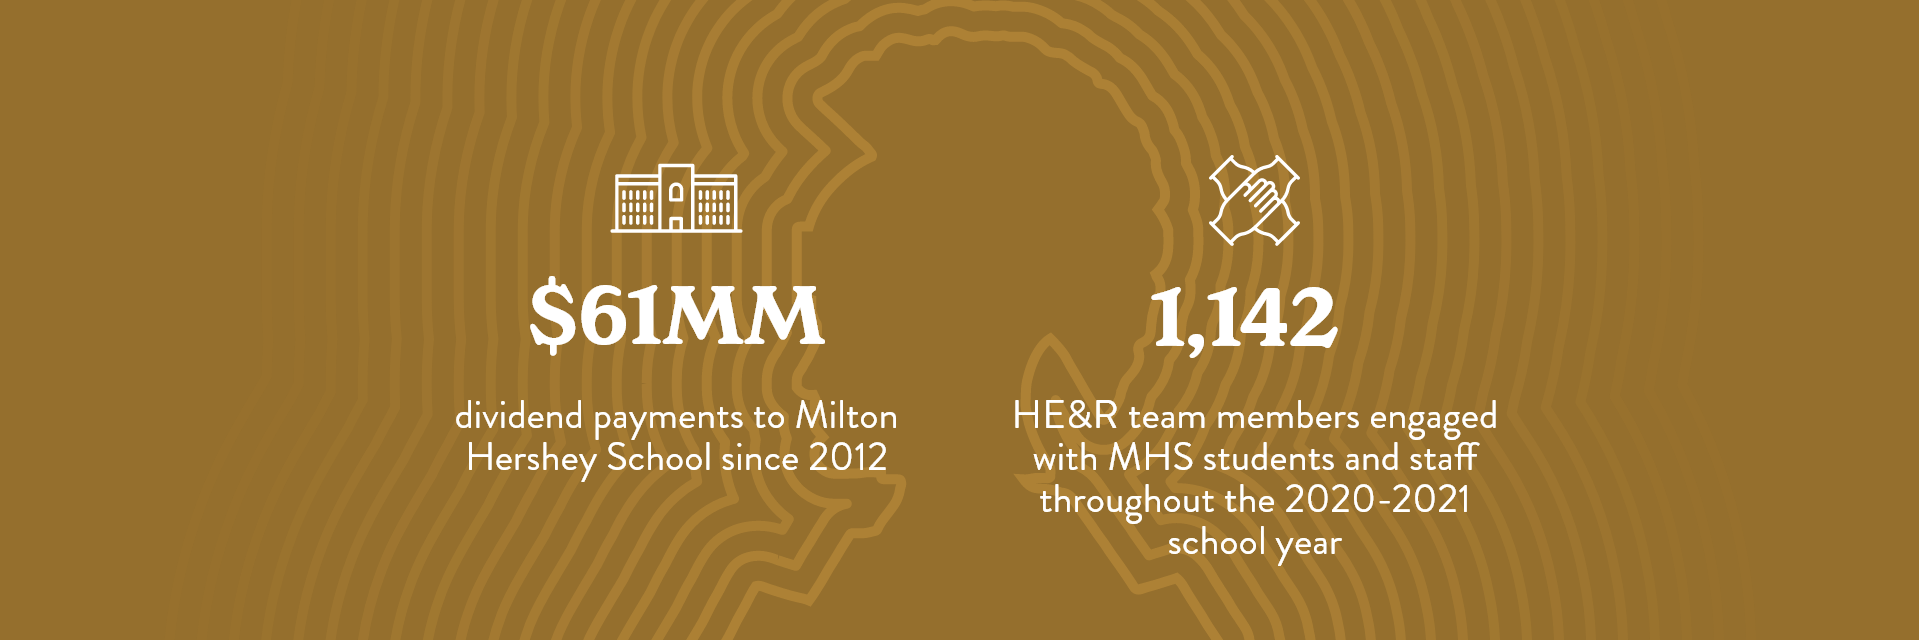 61MM dividend payment to Milton Hershey School since 2012. 1142 HE&R team members engaged with MHS students and staff throughout the 2020-2021 school year